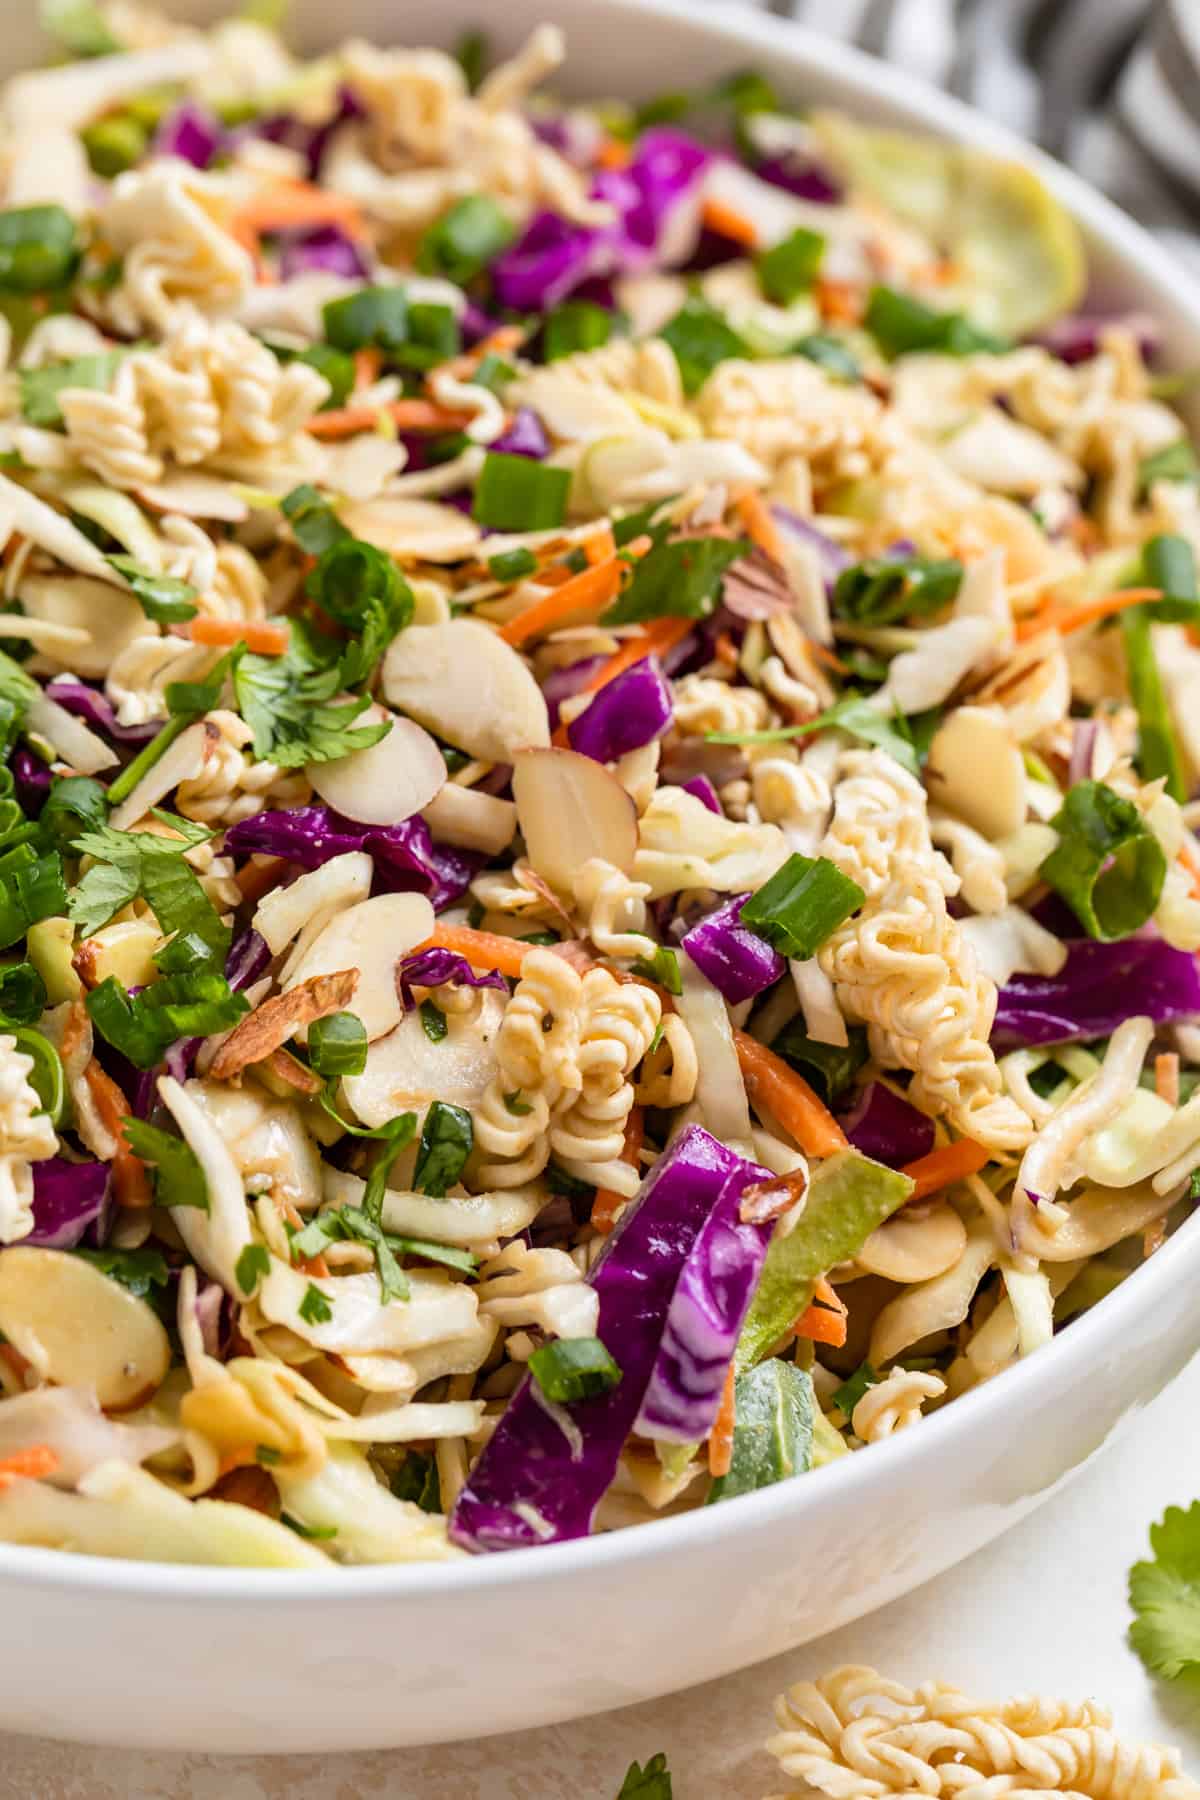 Ramen cabbage salad with peanut dressing topped with sliced almonds, cilantro and green onion.